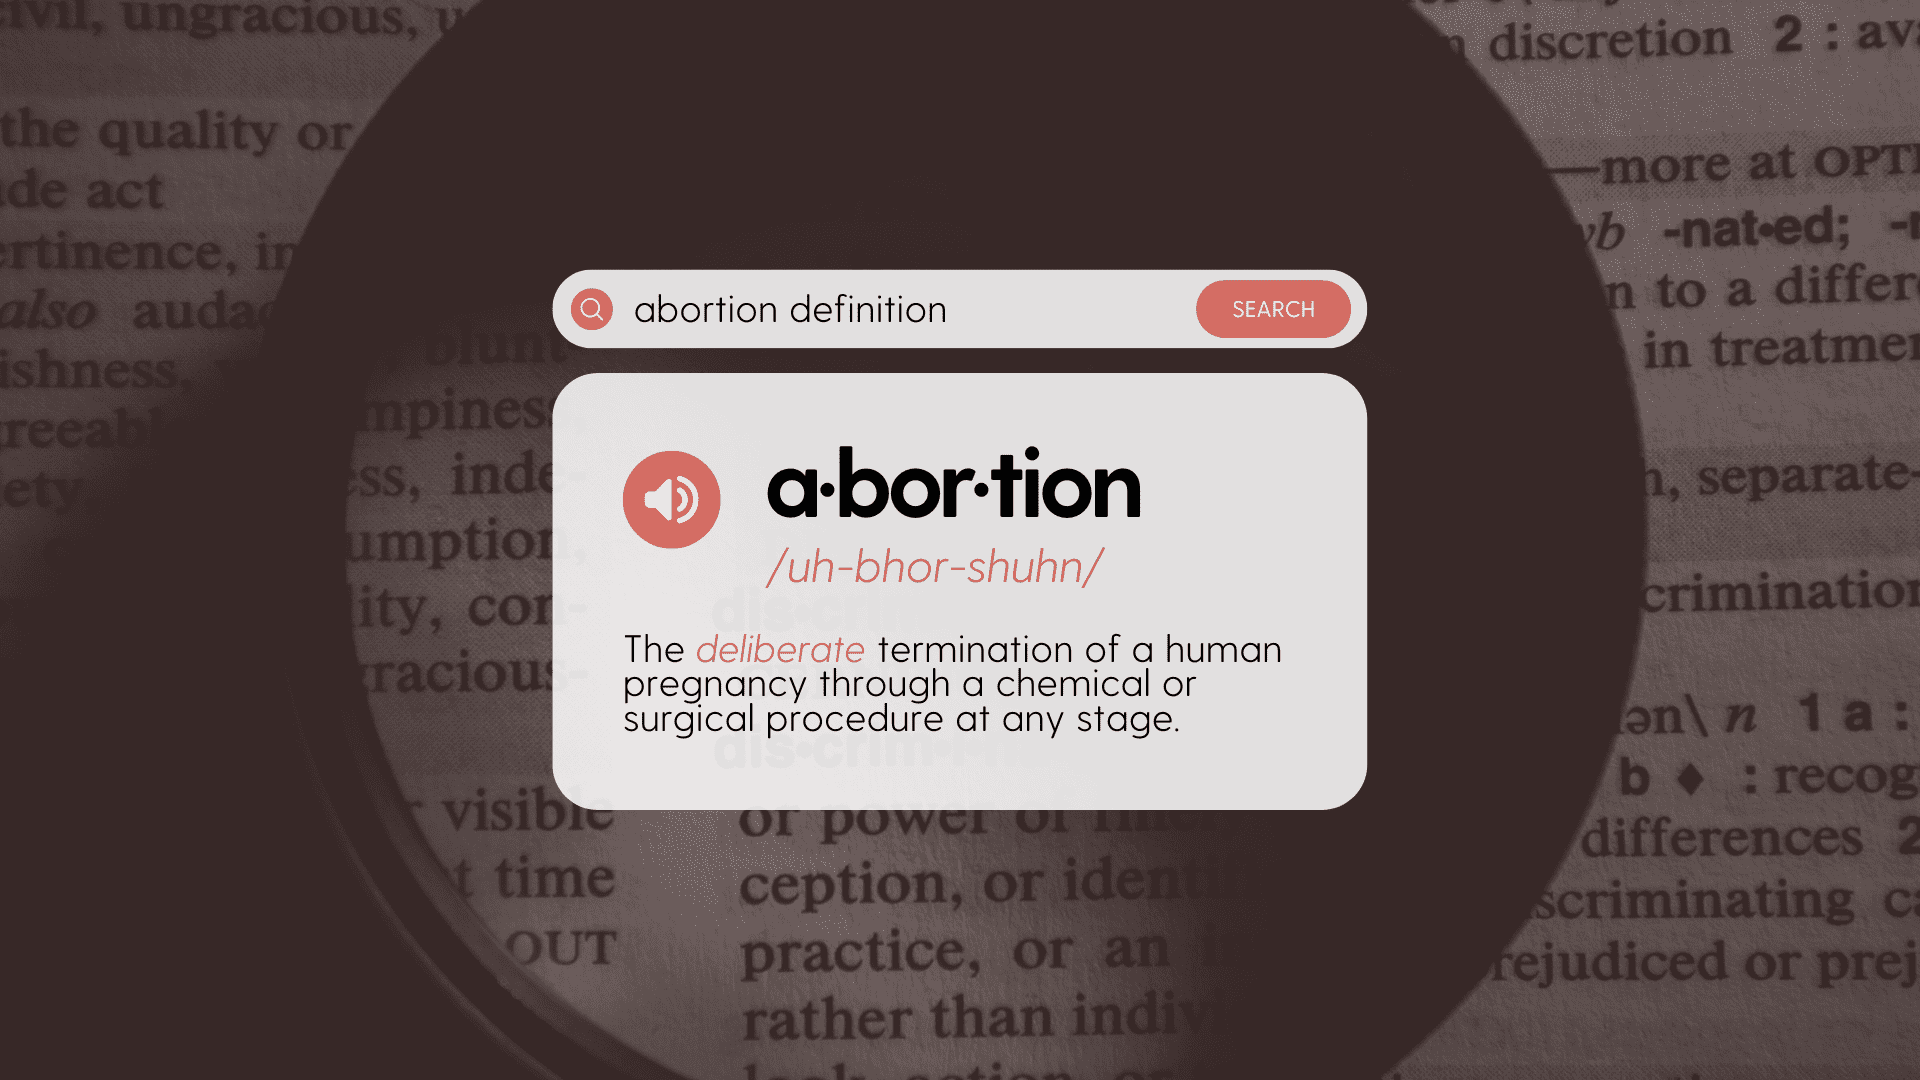 Cervix Dilation Porn - Guide to Abortion Definitions & Language - Focus on the Family